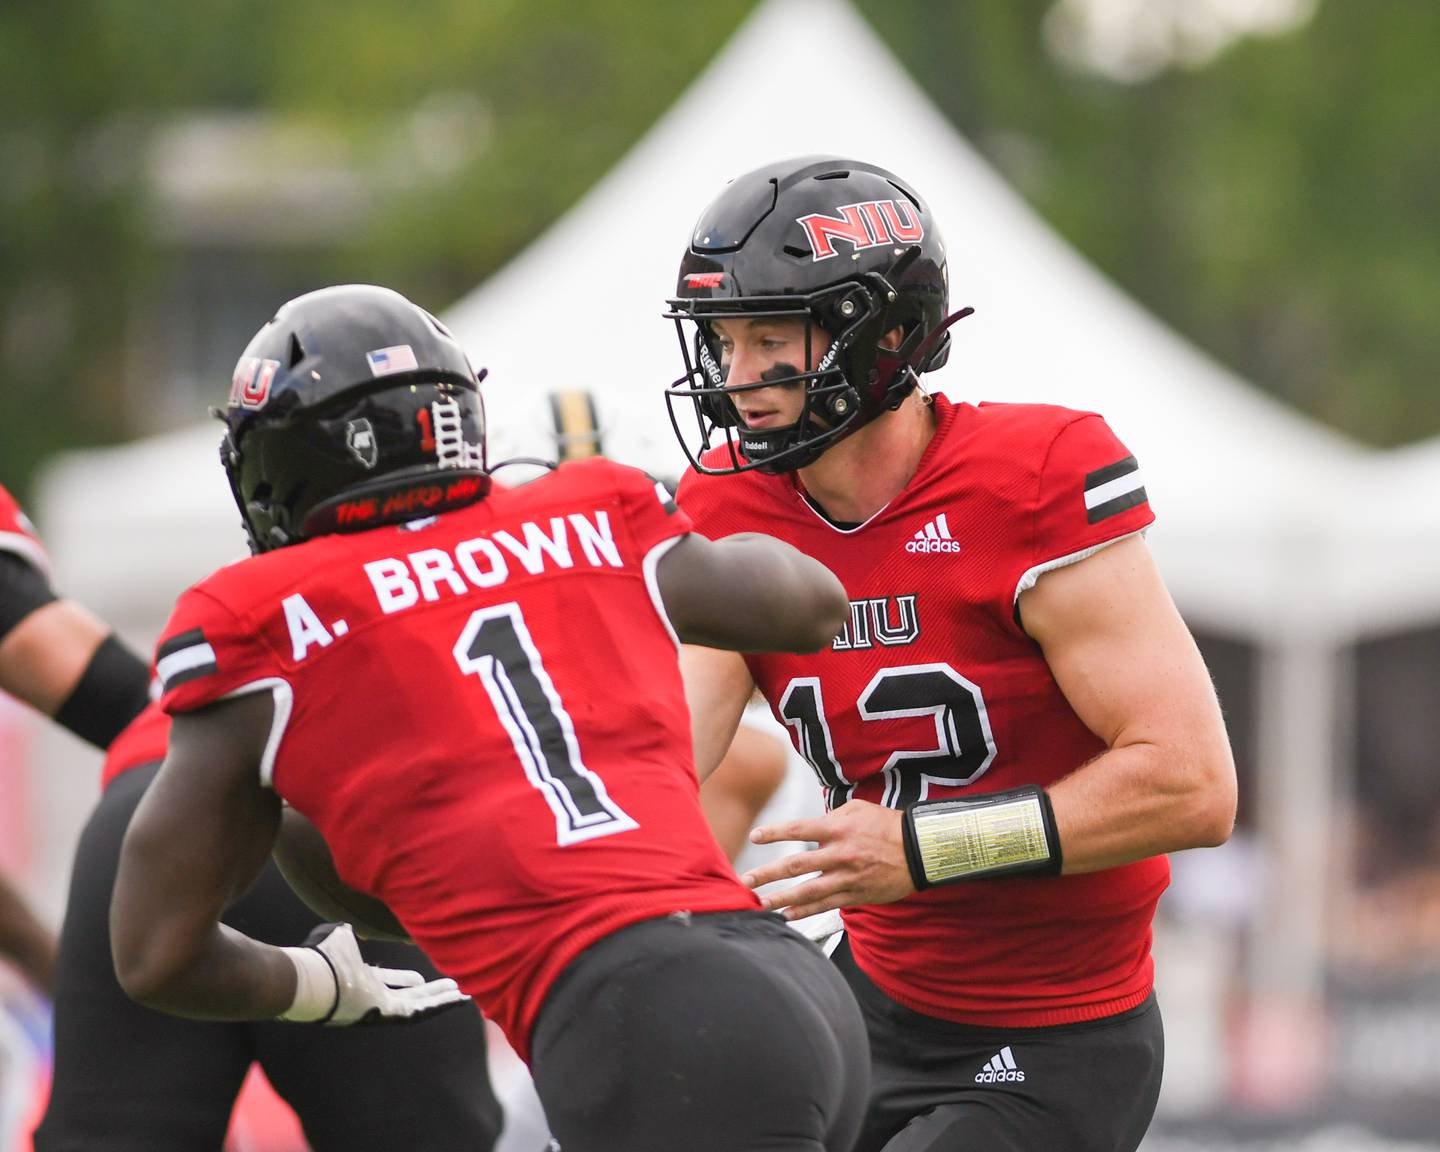 Northern Illinois Huskies Rocky Lombardi (12) hands the ball off to teammate Antario Brown (1) in the second quarter Saturday Sep. 17th while taking on Vanderbilt at Huskie Stadium in DeKalb.